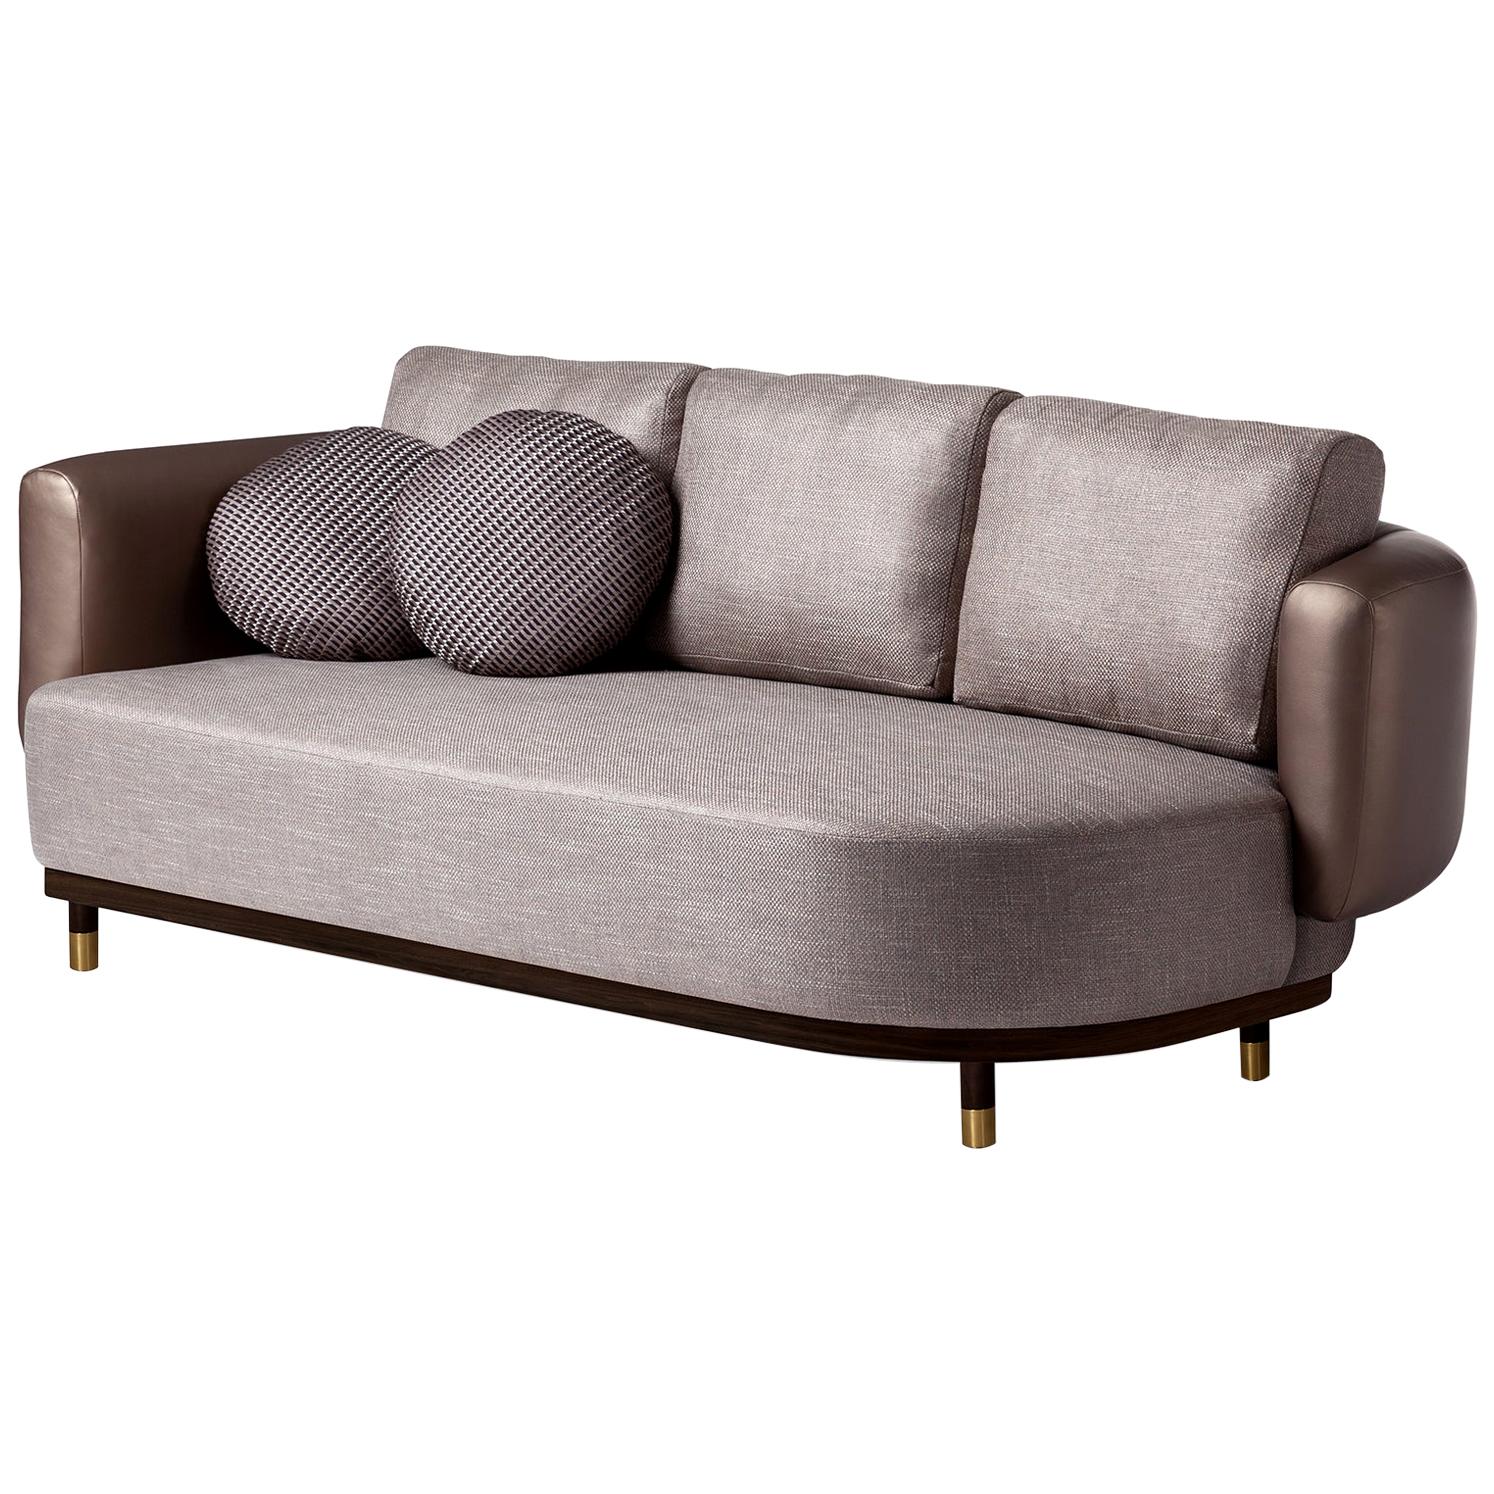 DOOQ Sofa Settee with Weaved Texture, Bronze Leather&Brass Single Man, width 240 For Sale